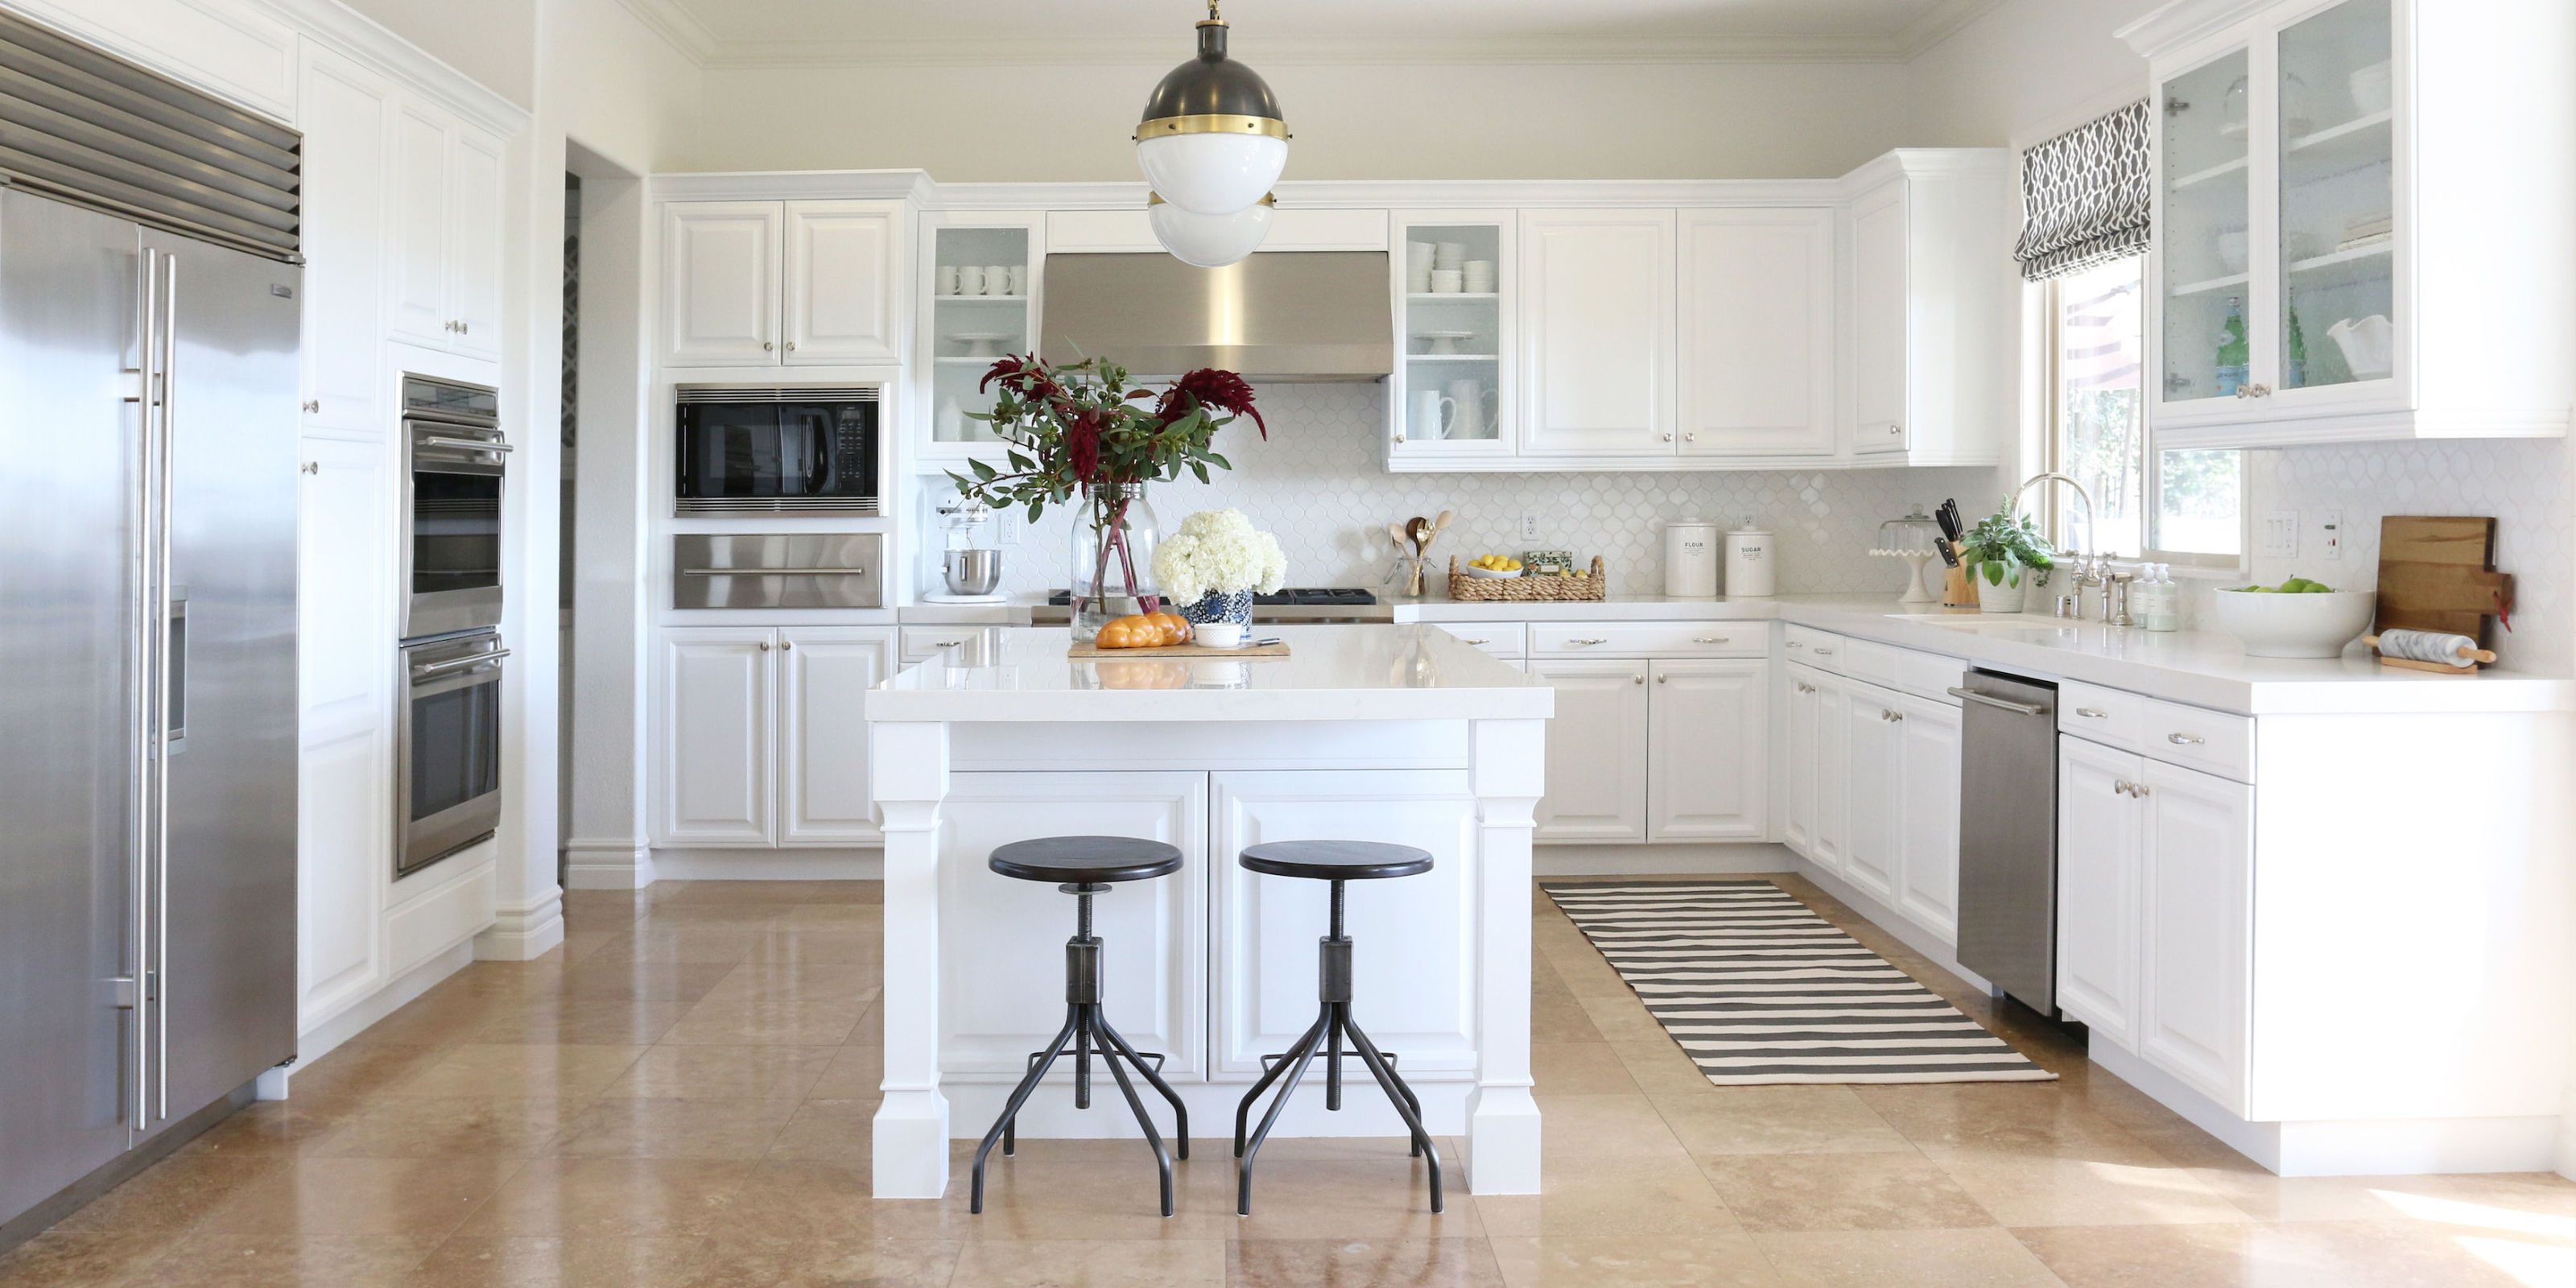 14 Best White Kitchen Cabinets - Design Ideas for White Cabinets